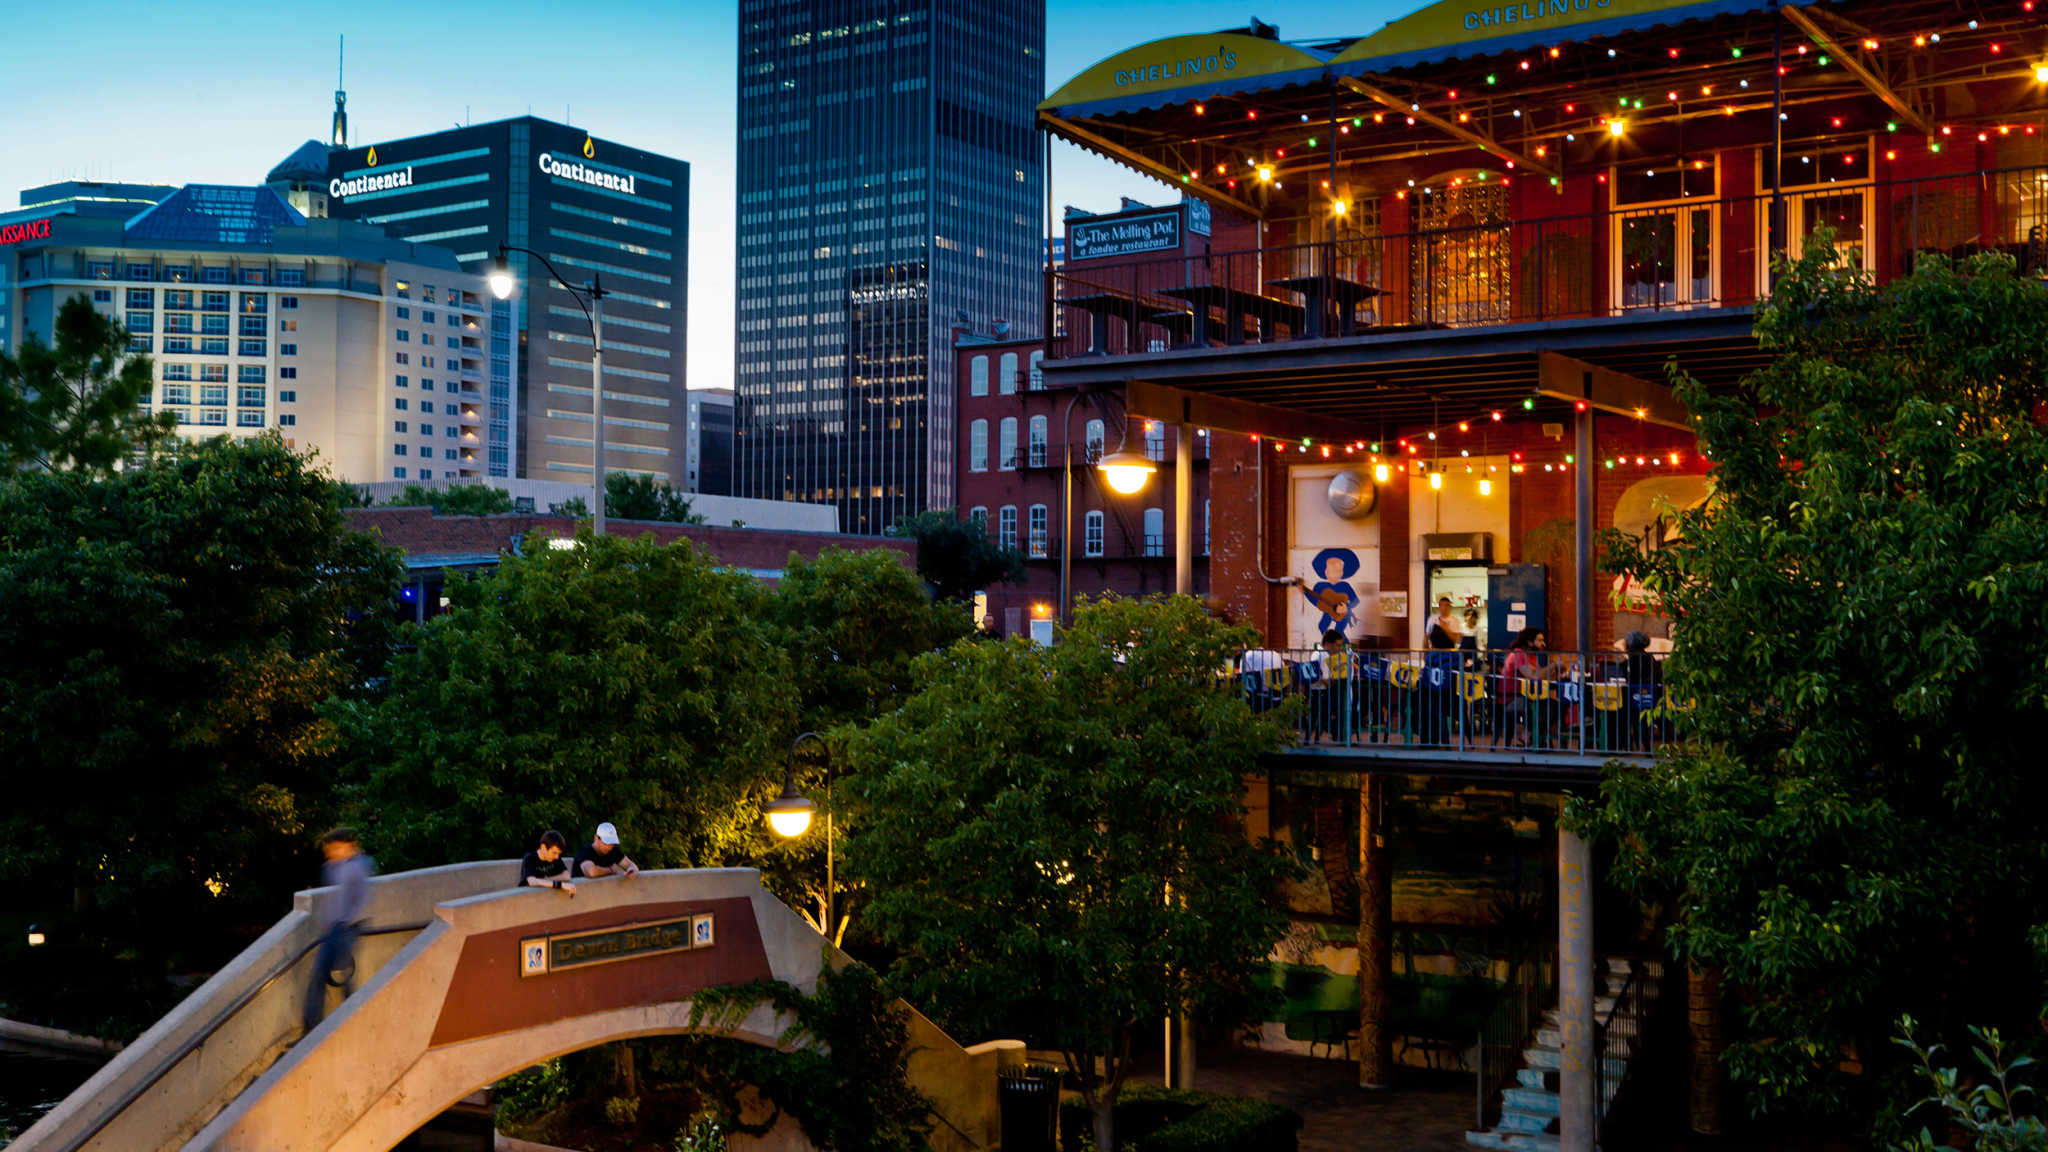 Oklahoma City Hotels, Restaurants, Events & Things to Do